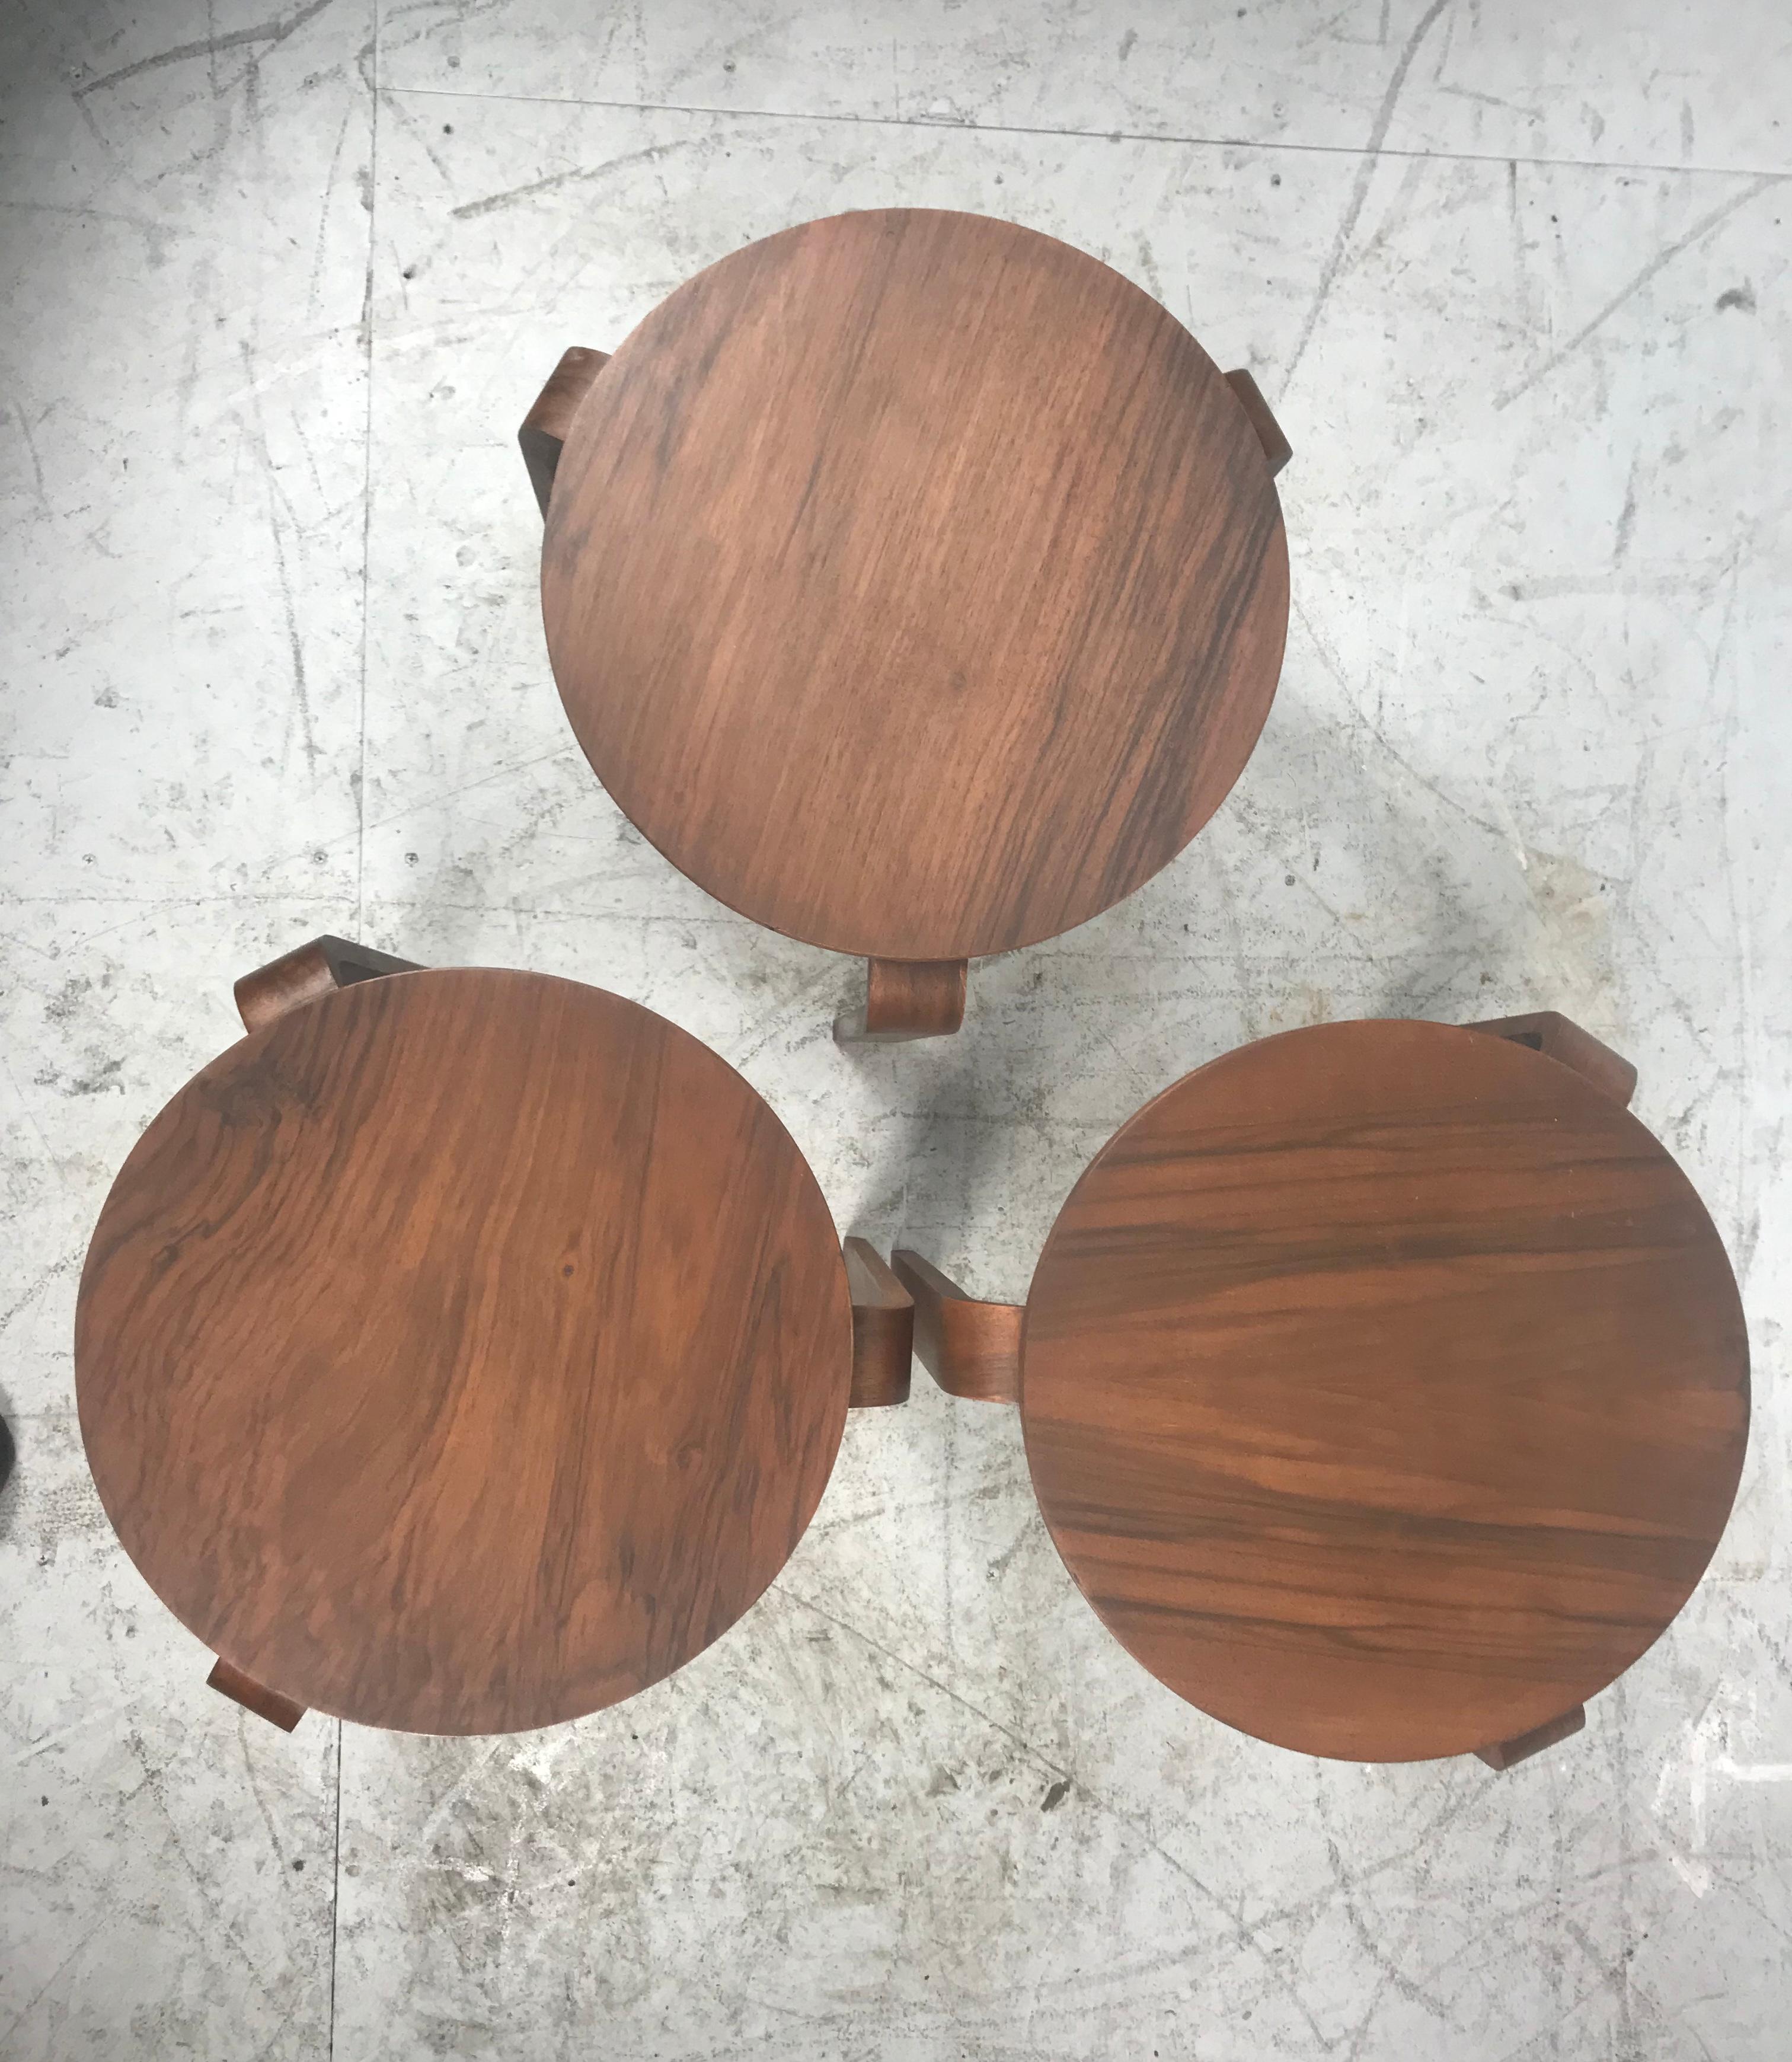 Classic Set of 3 Walnut Stacking Stools Manufactured by Thonet after Alvar Aalto 1